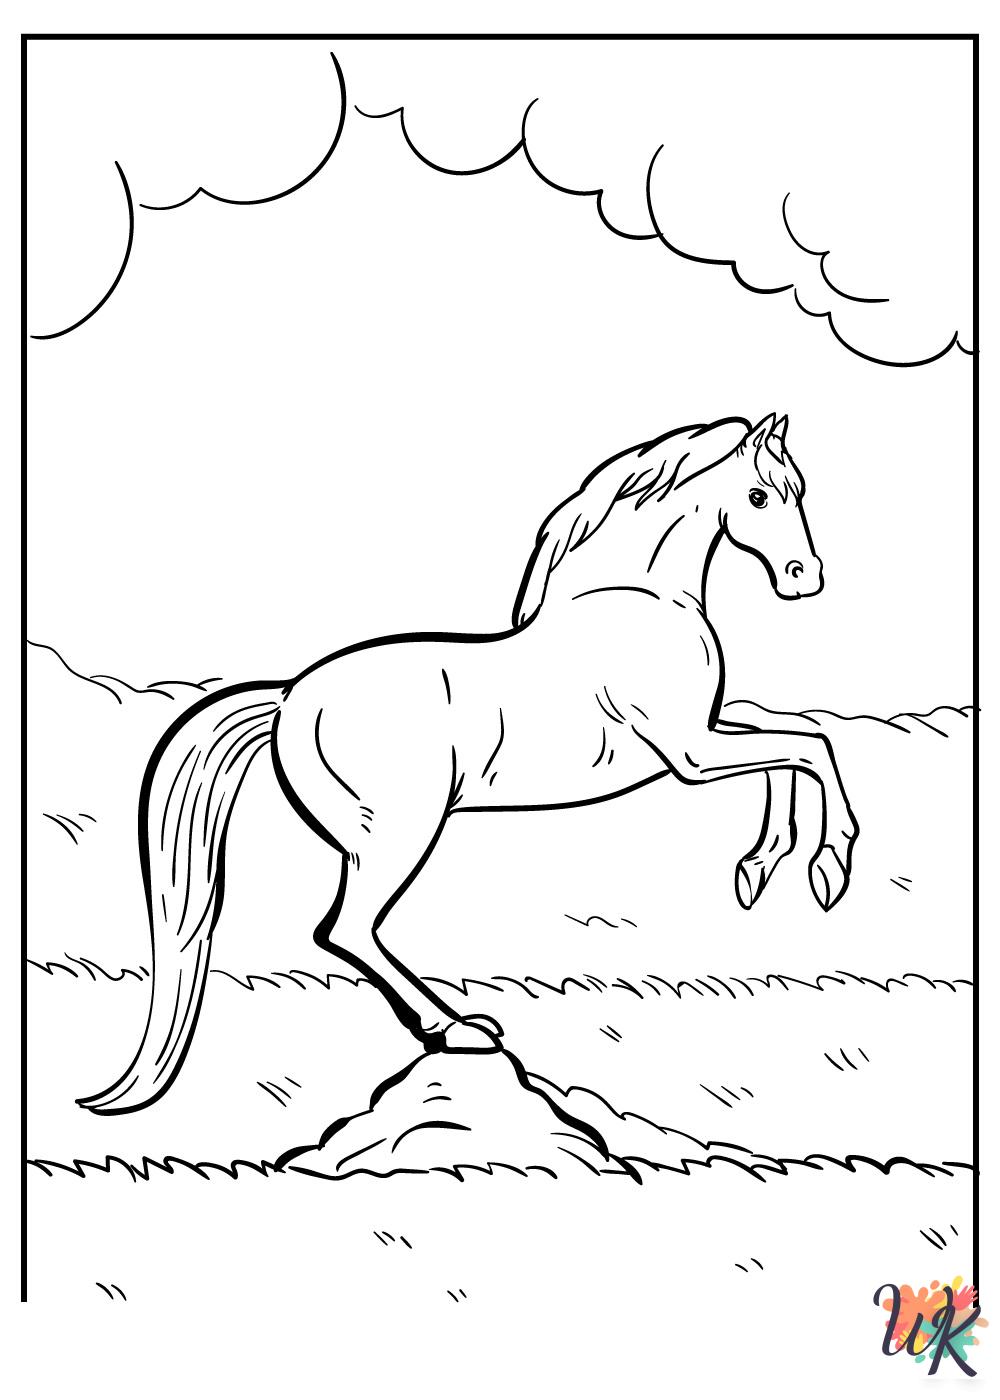 Horse decorations coloring pages